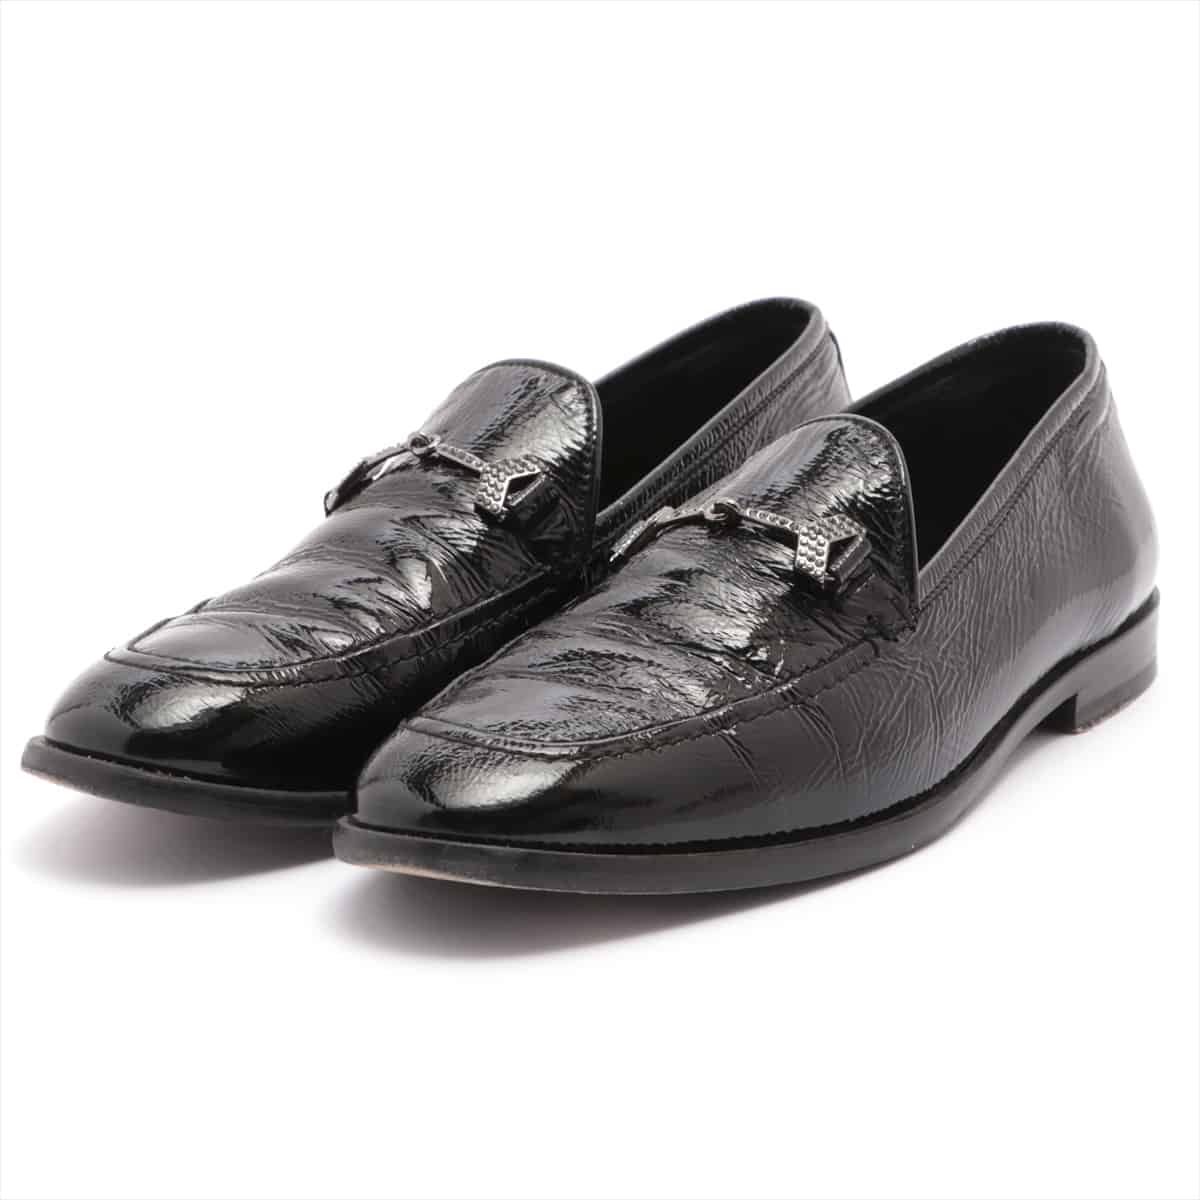 Jimmy Choo Patent leather Loafer 39 Ladies' Black